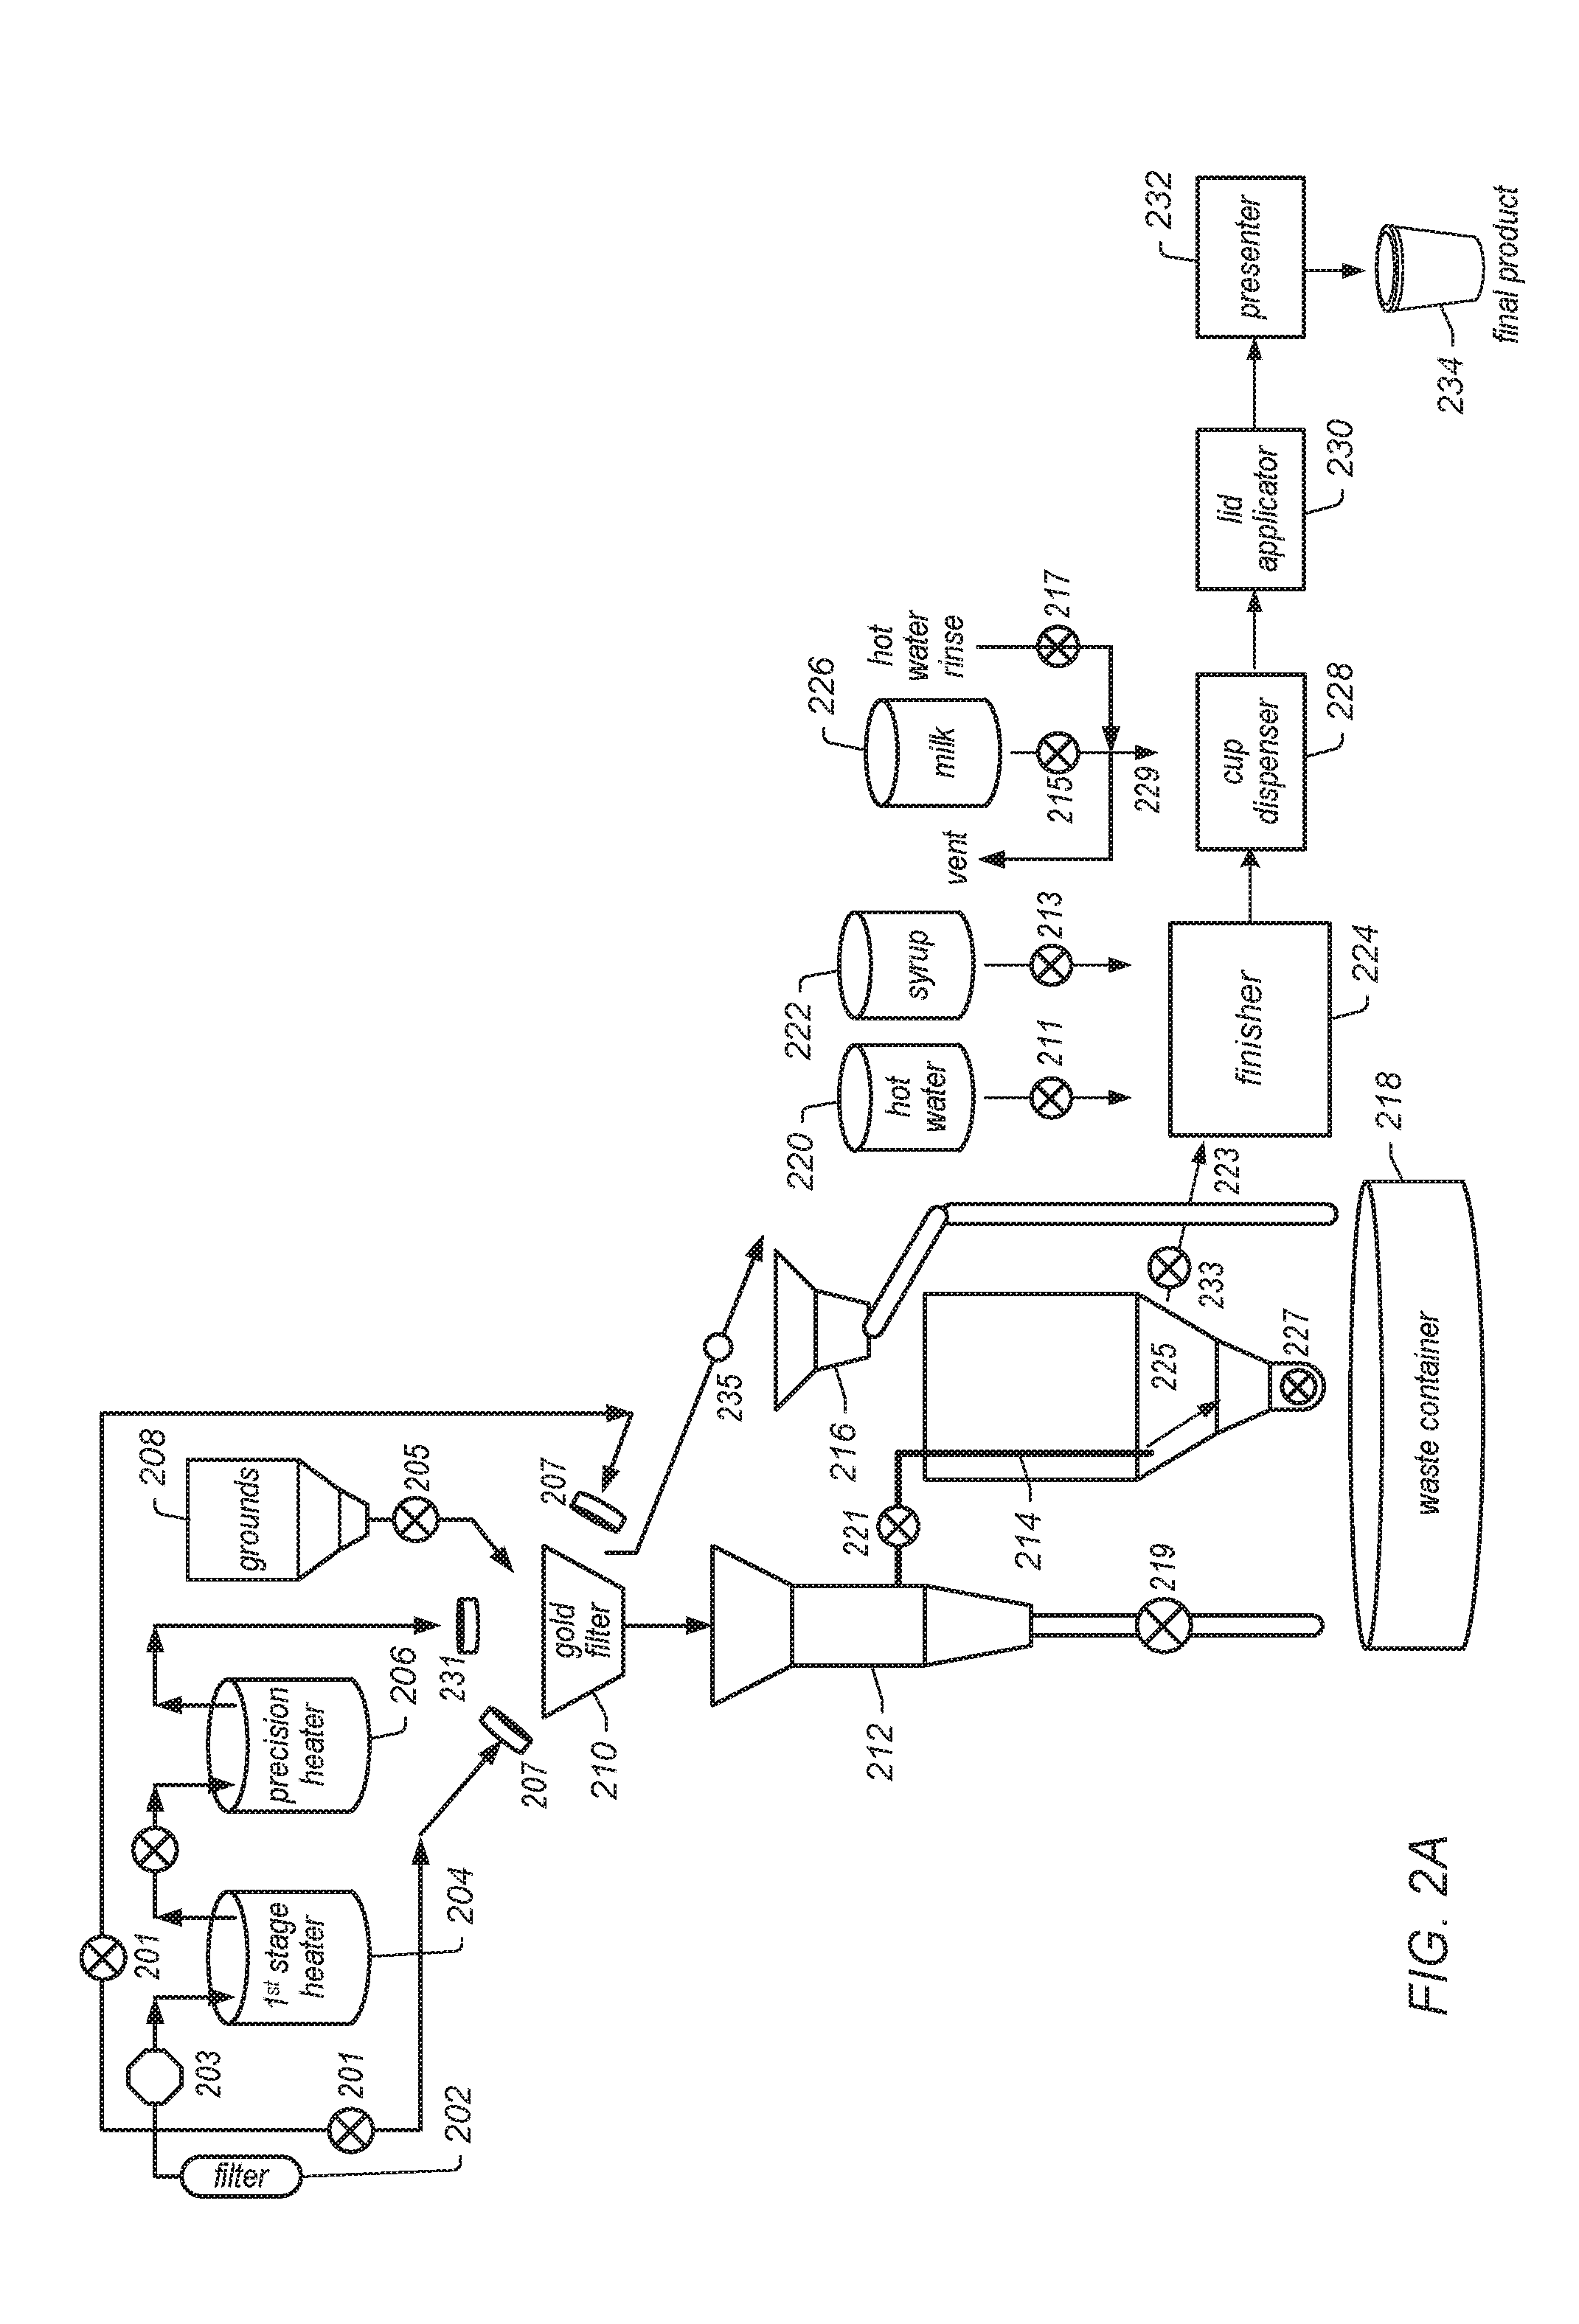 System and method for brewing and dispensing coffee using customer profiling